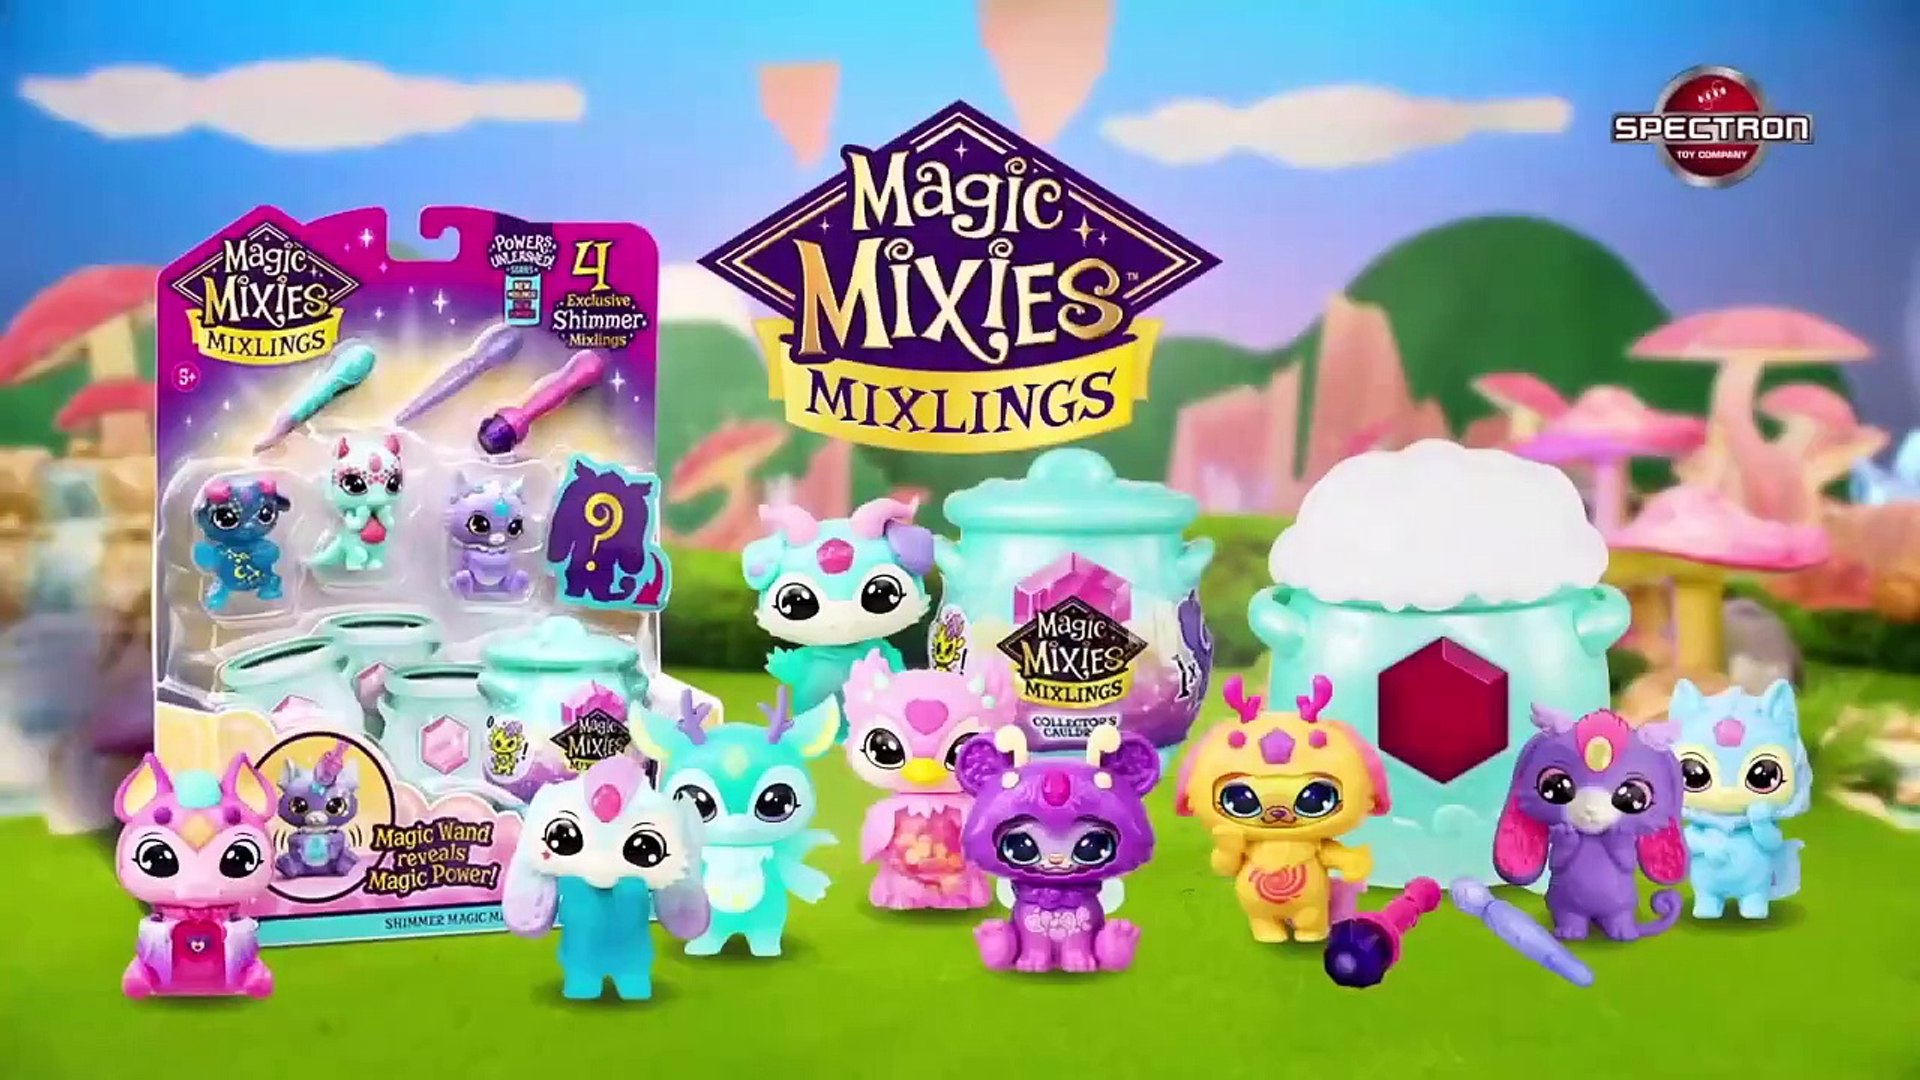 New in 2023: Magic Mixies Mixlings! - Spectron The Toy Company